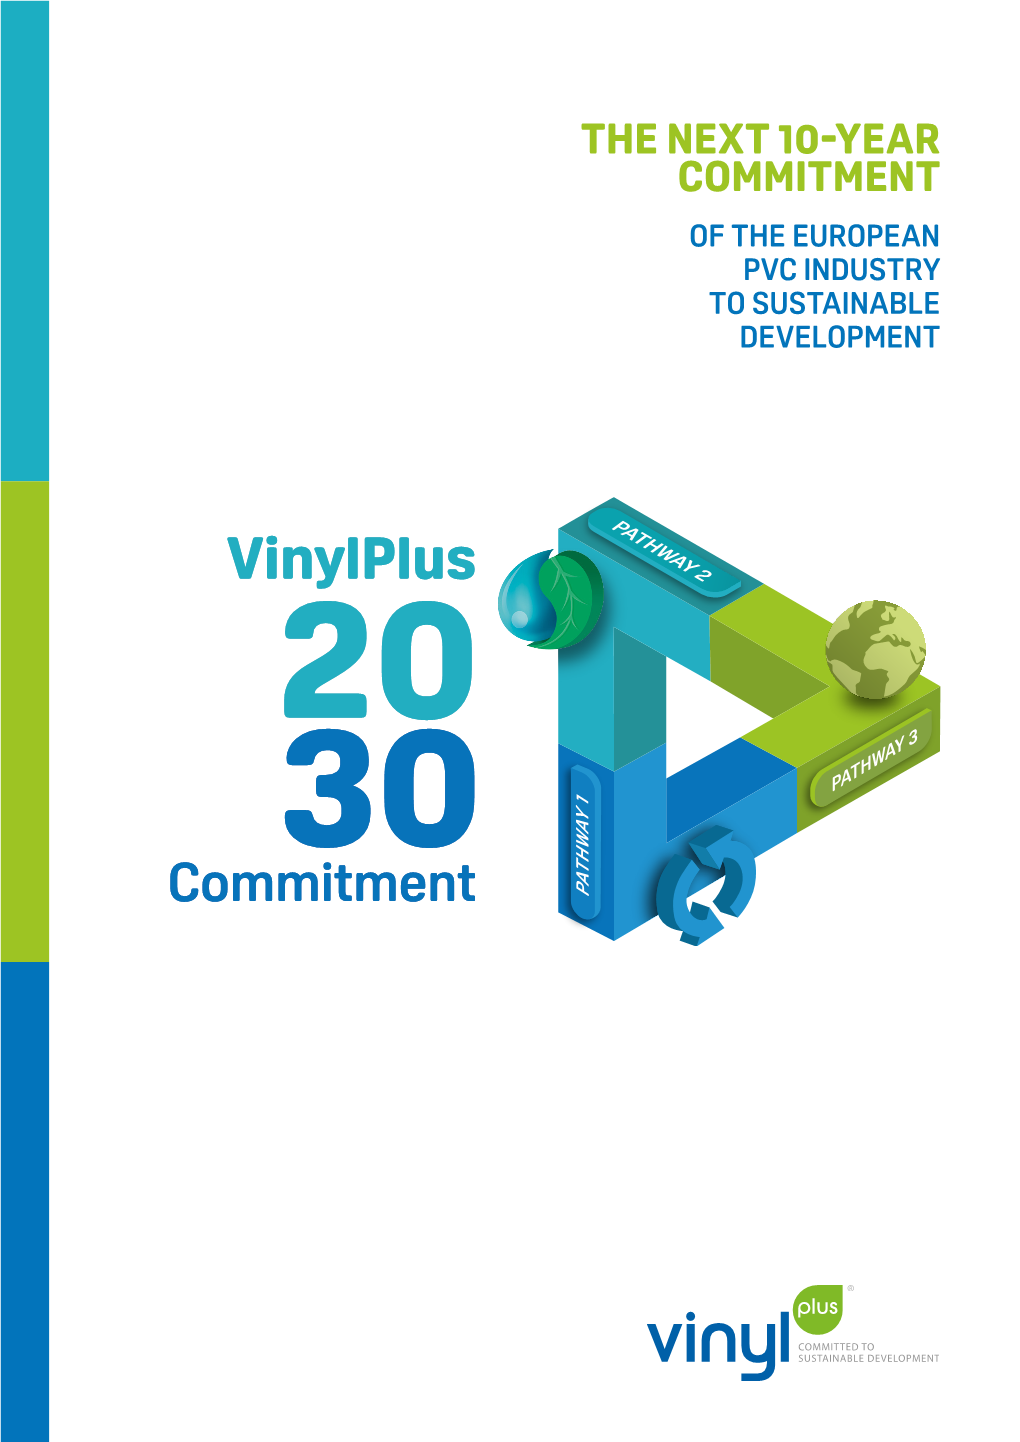 The Next 10-Year Commitment of the European Pvc Industry to Sustainable Development